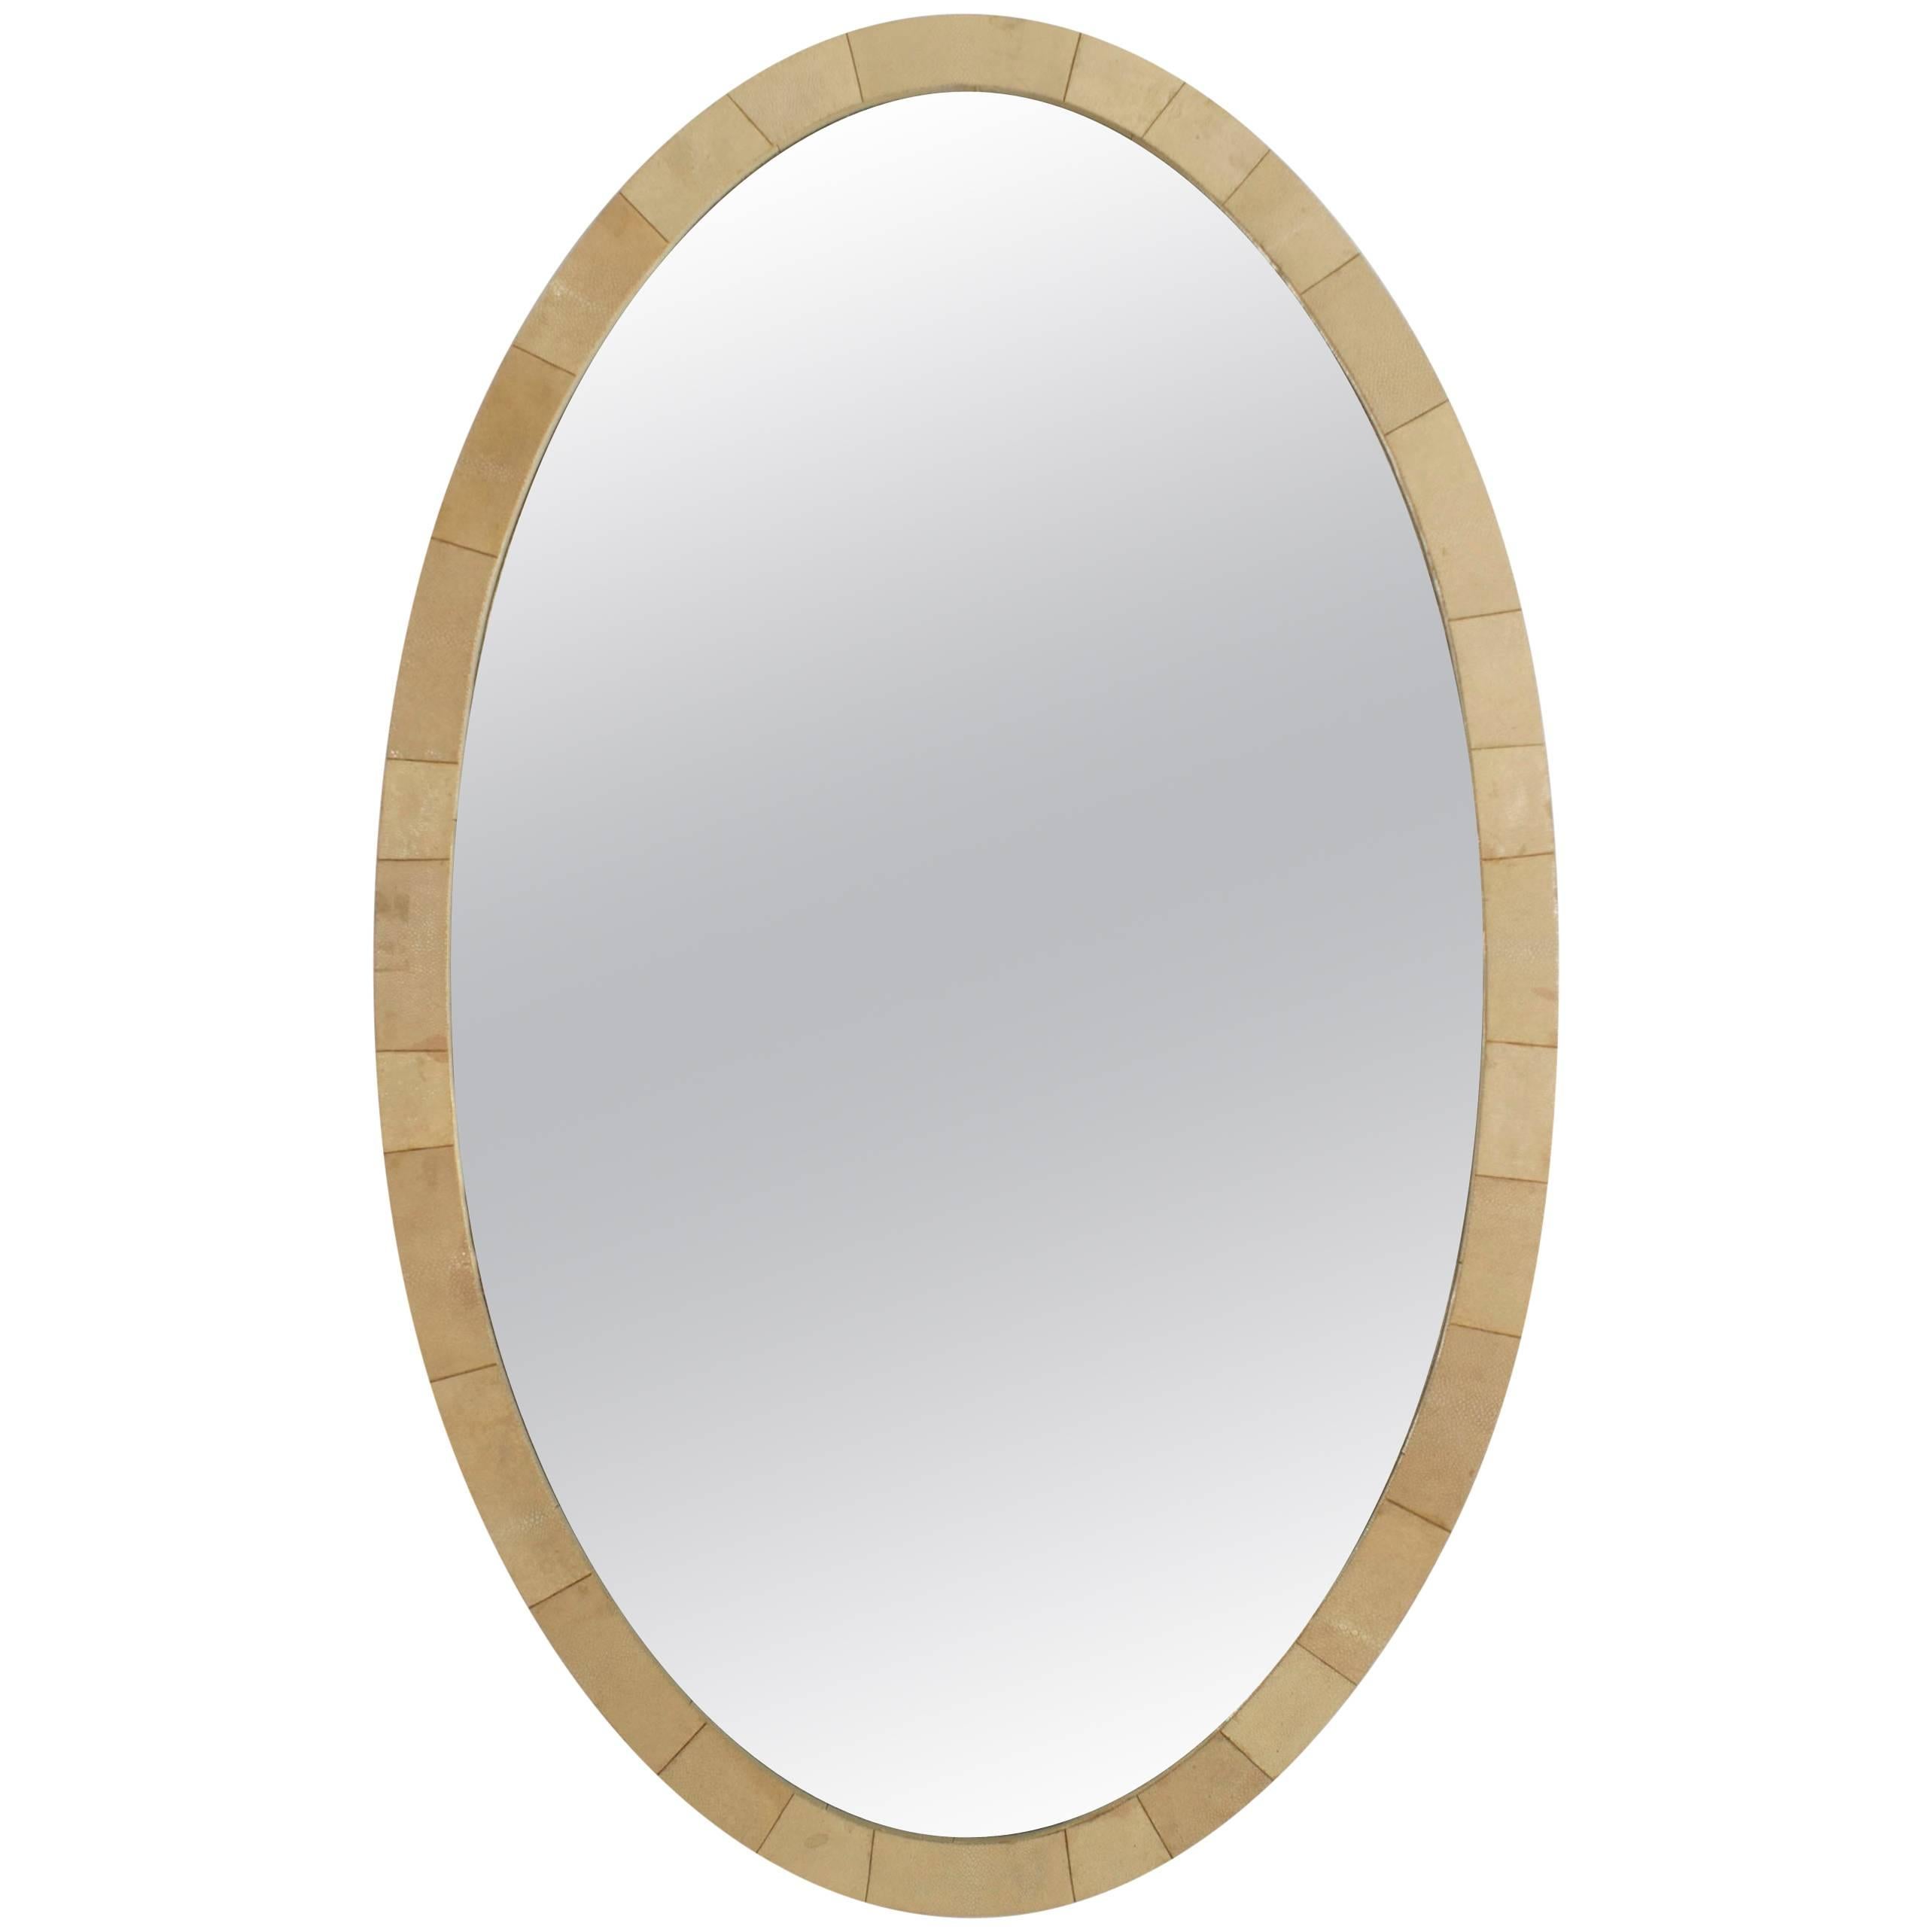 French Art Deco Large Oval Shaped Cream Colored Shagreen Wall Mirror